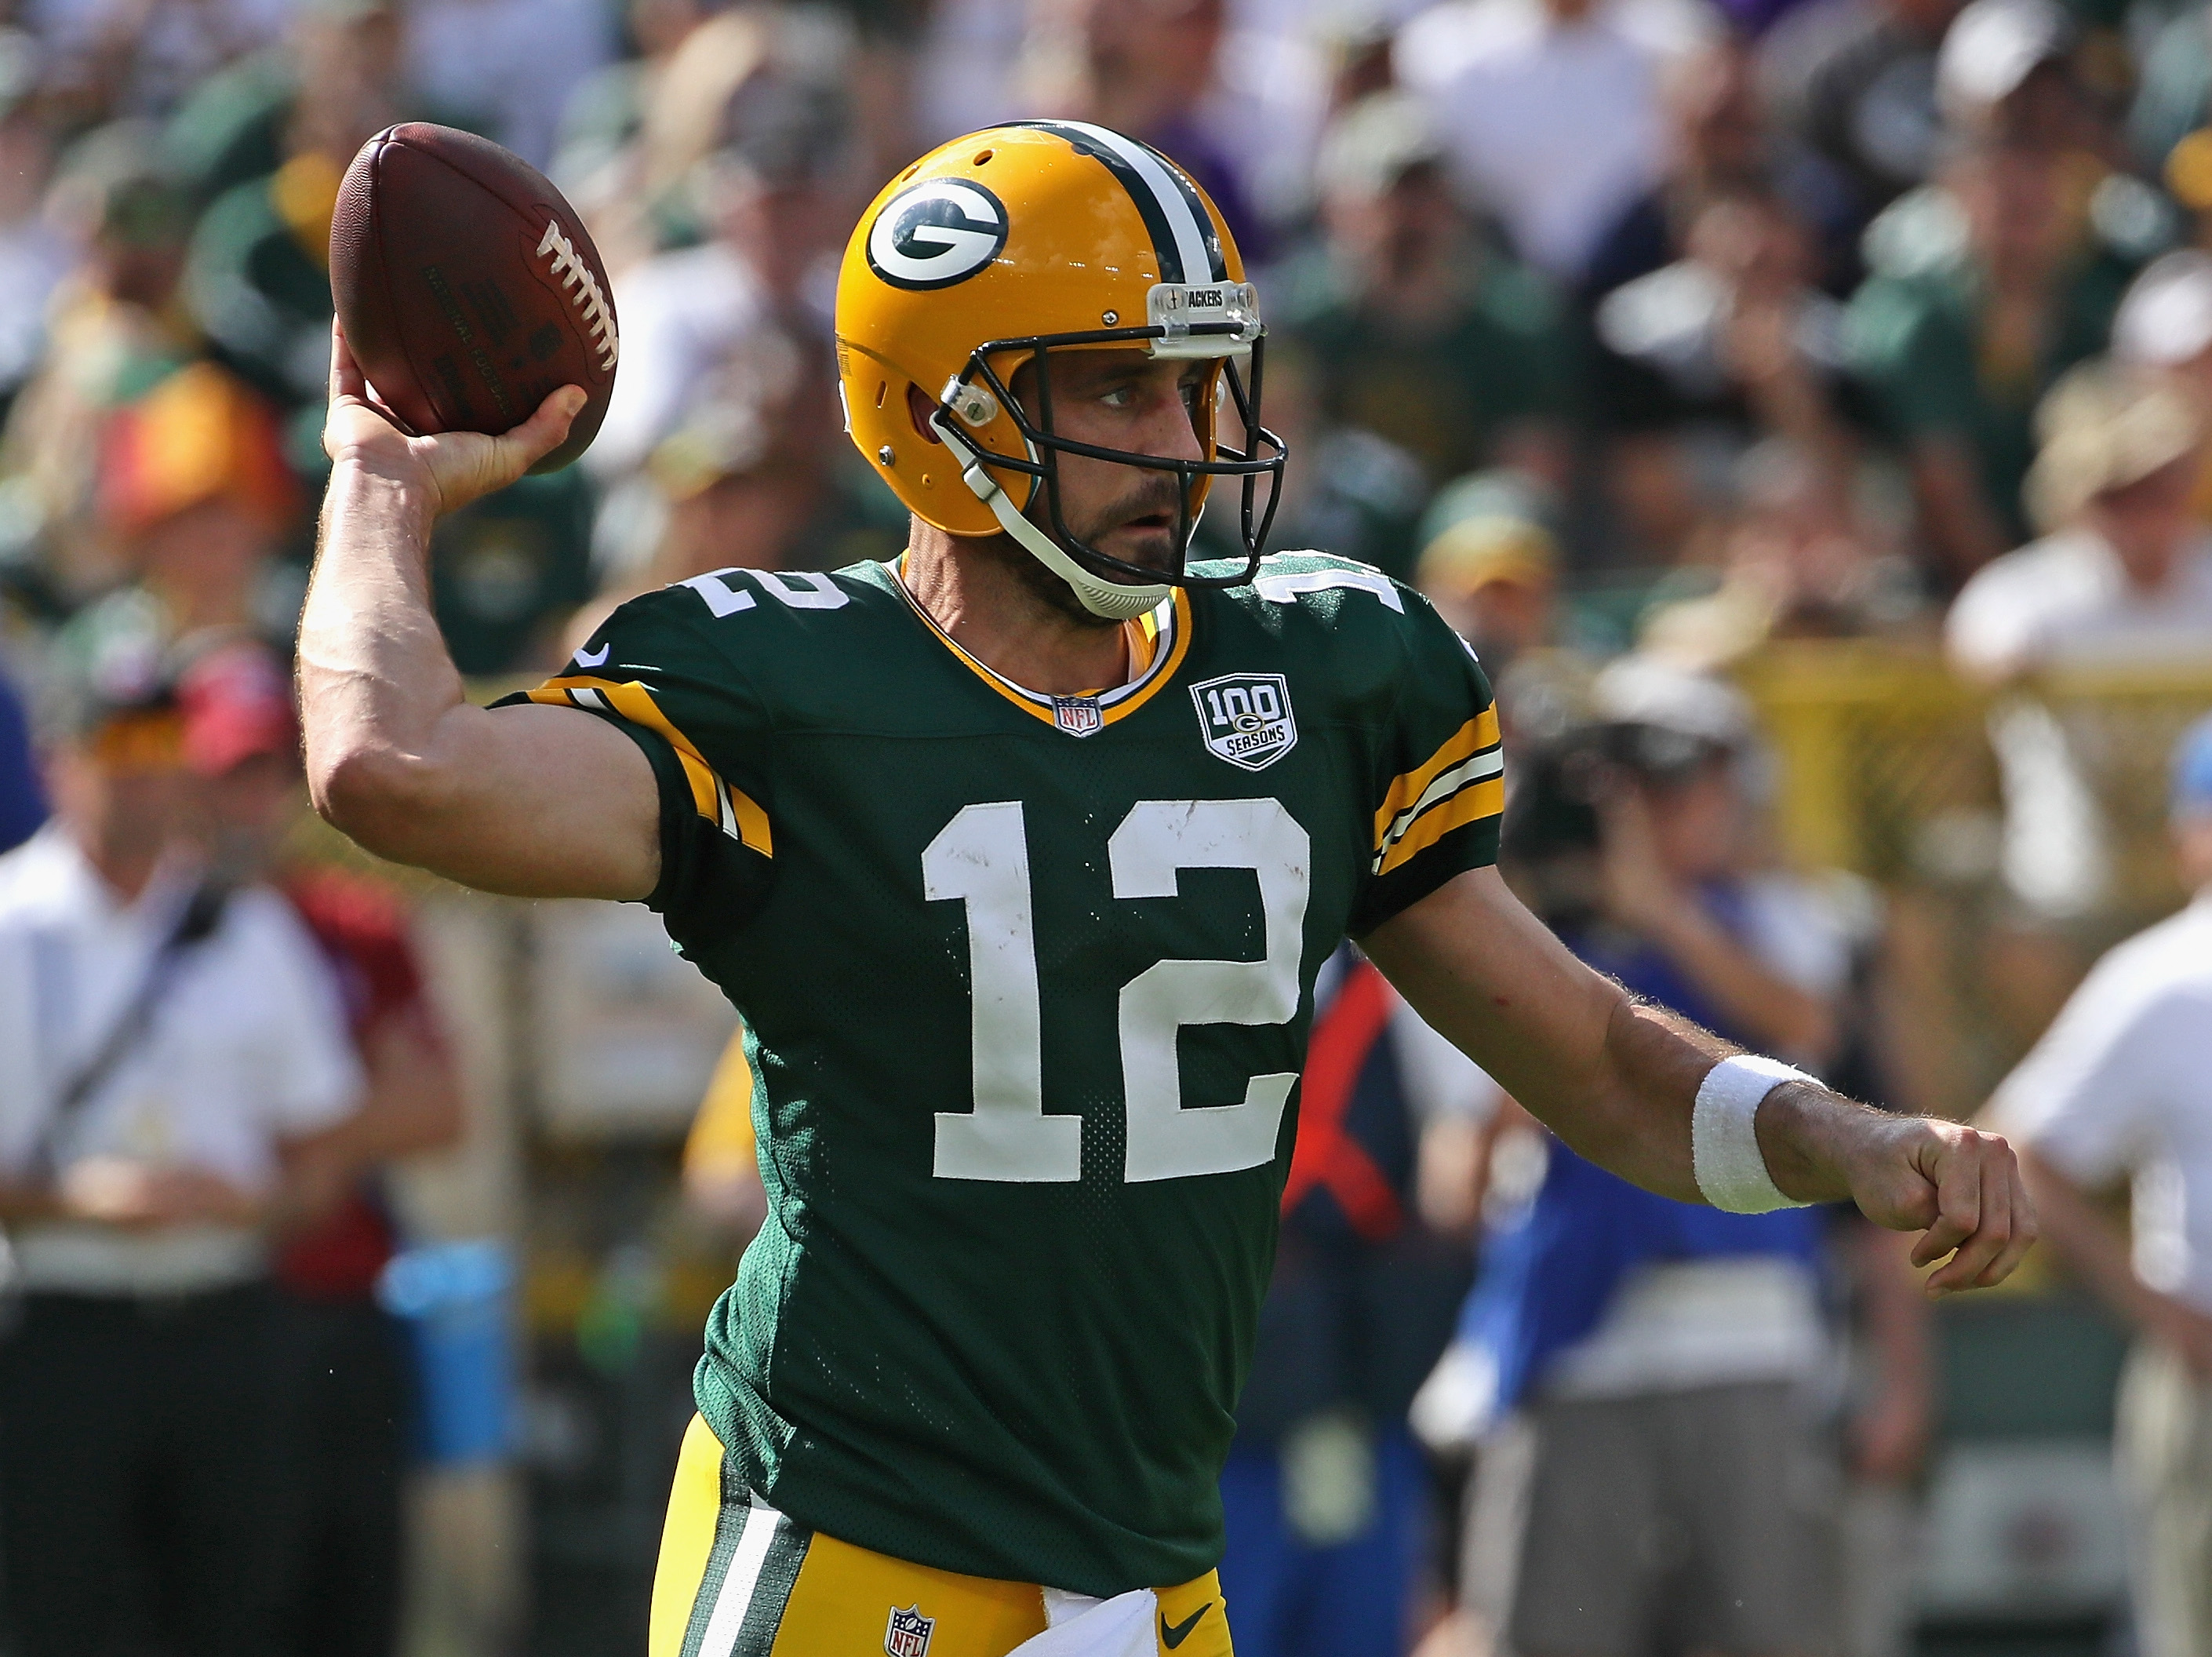 Aaron Rodgers is taking the spotlight away from college football stars and Tim Tebow.